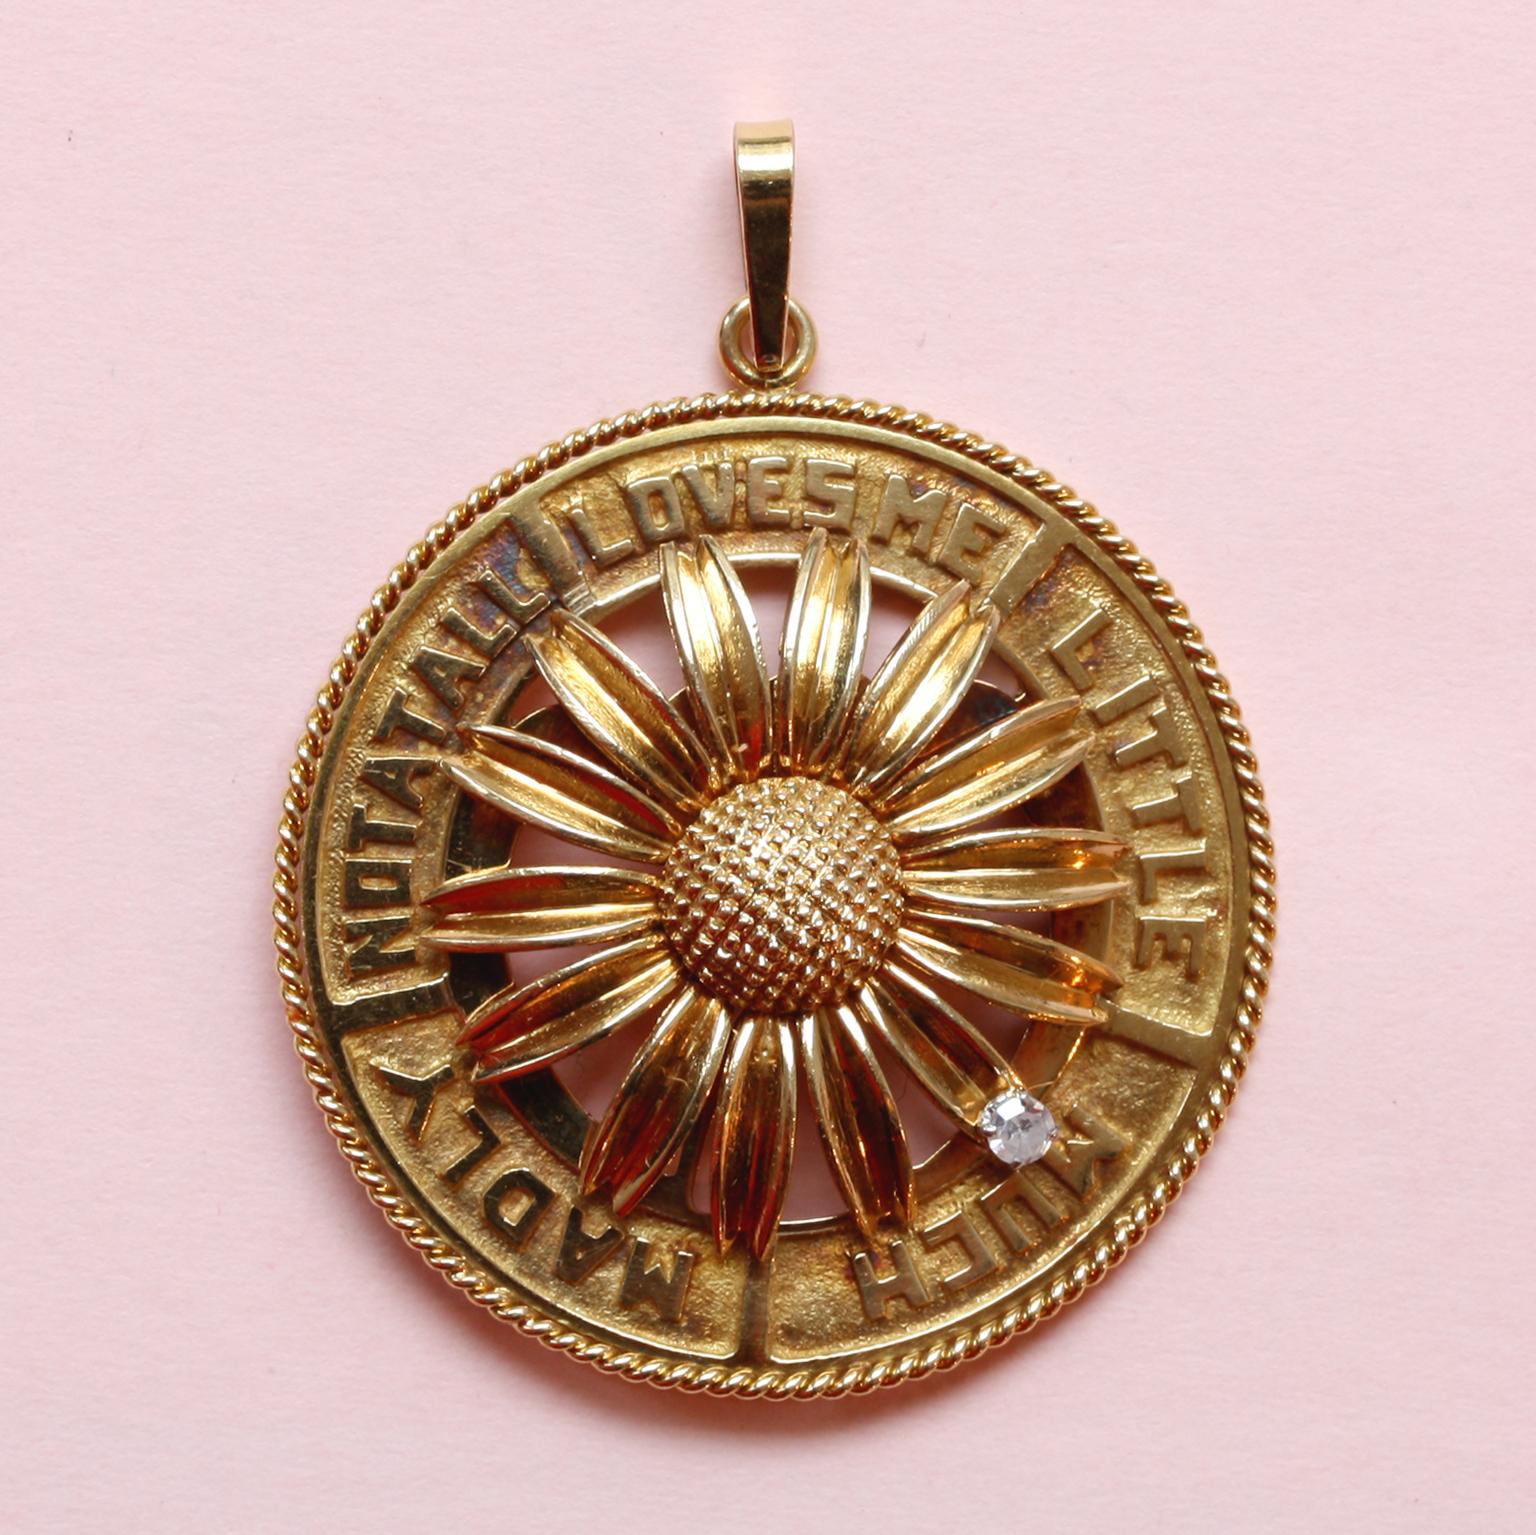 A large round 18 carat gold mechanichal charm with a spinning daisy in the center, one of the petals of the daisy has a brilliant cut diamond that spins around and tells you how much love there is: LOVES ME - LITTLE - MUCH - MADLY - NOT AT ALL,